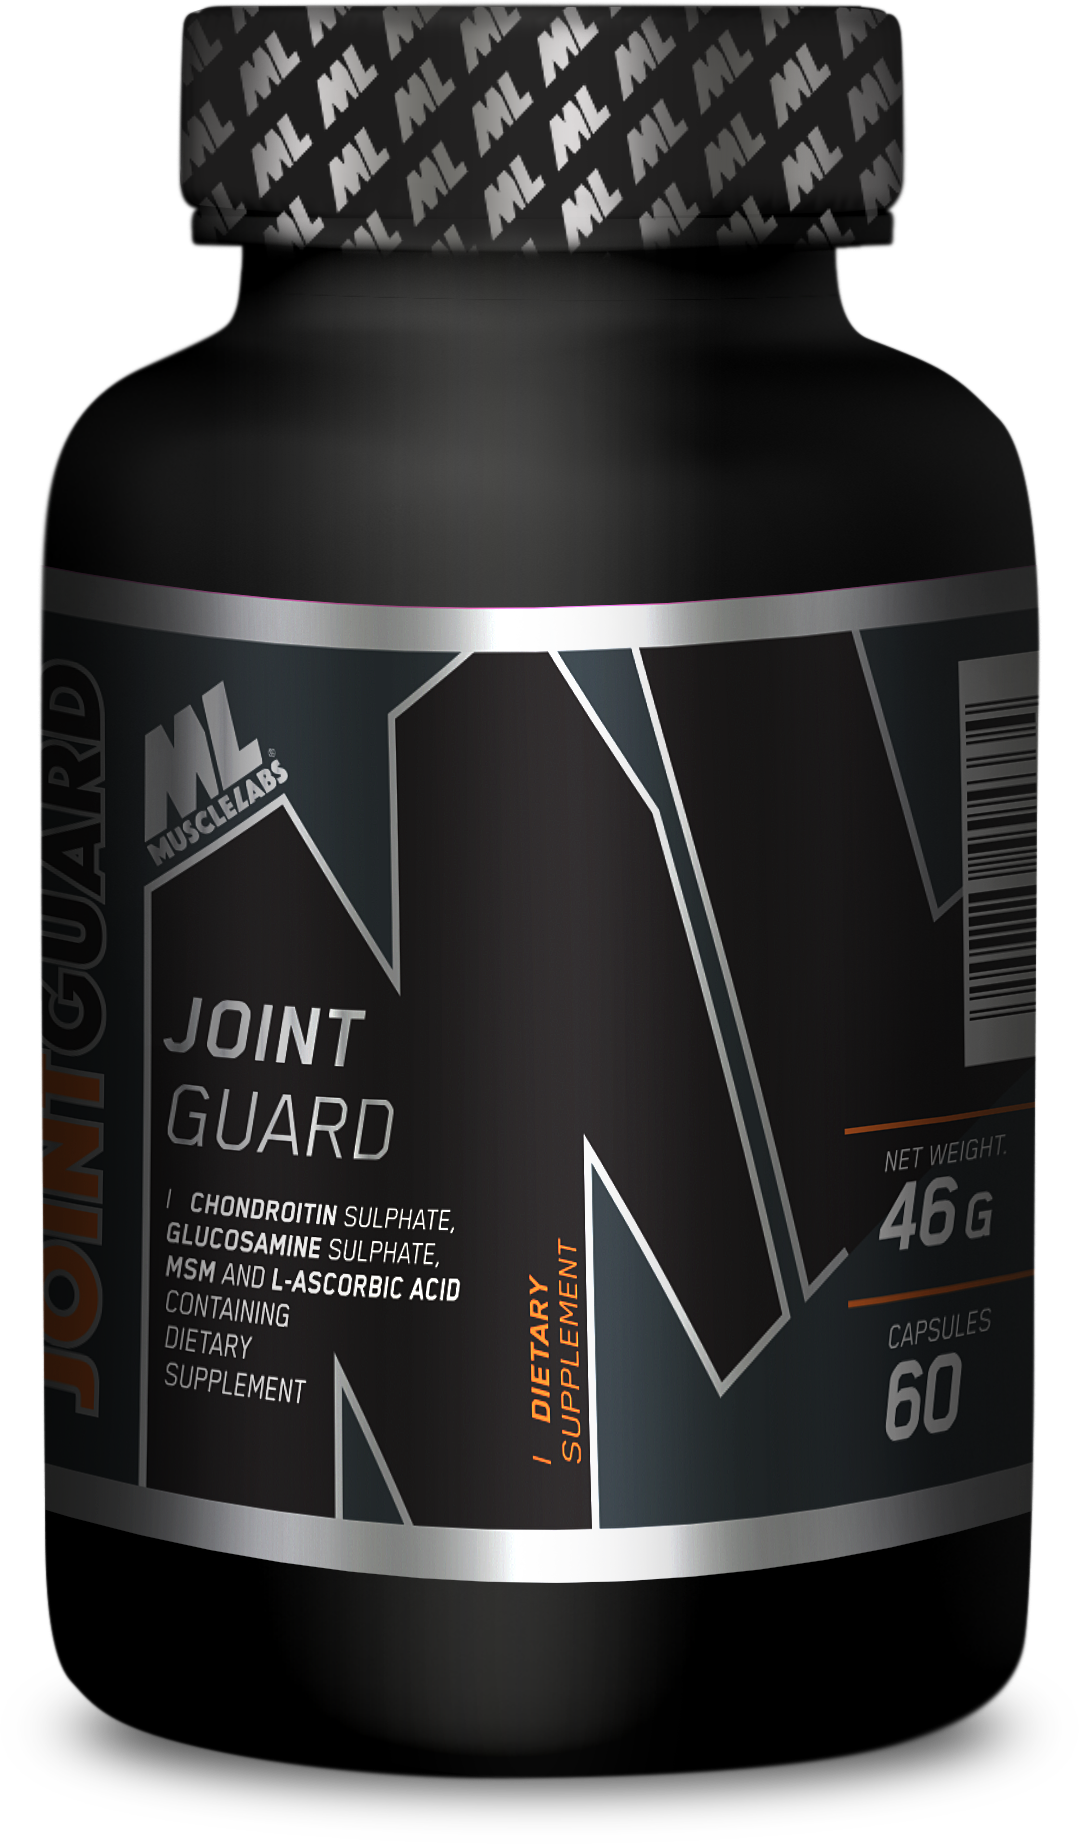 MUSCLELABS JOINT GUARD